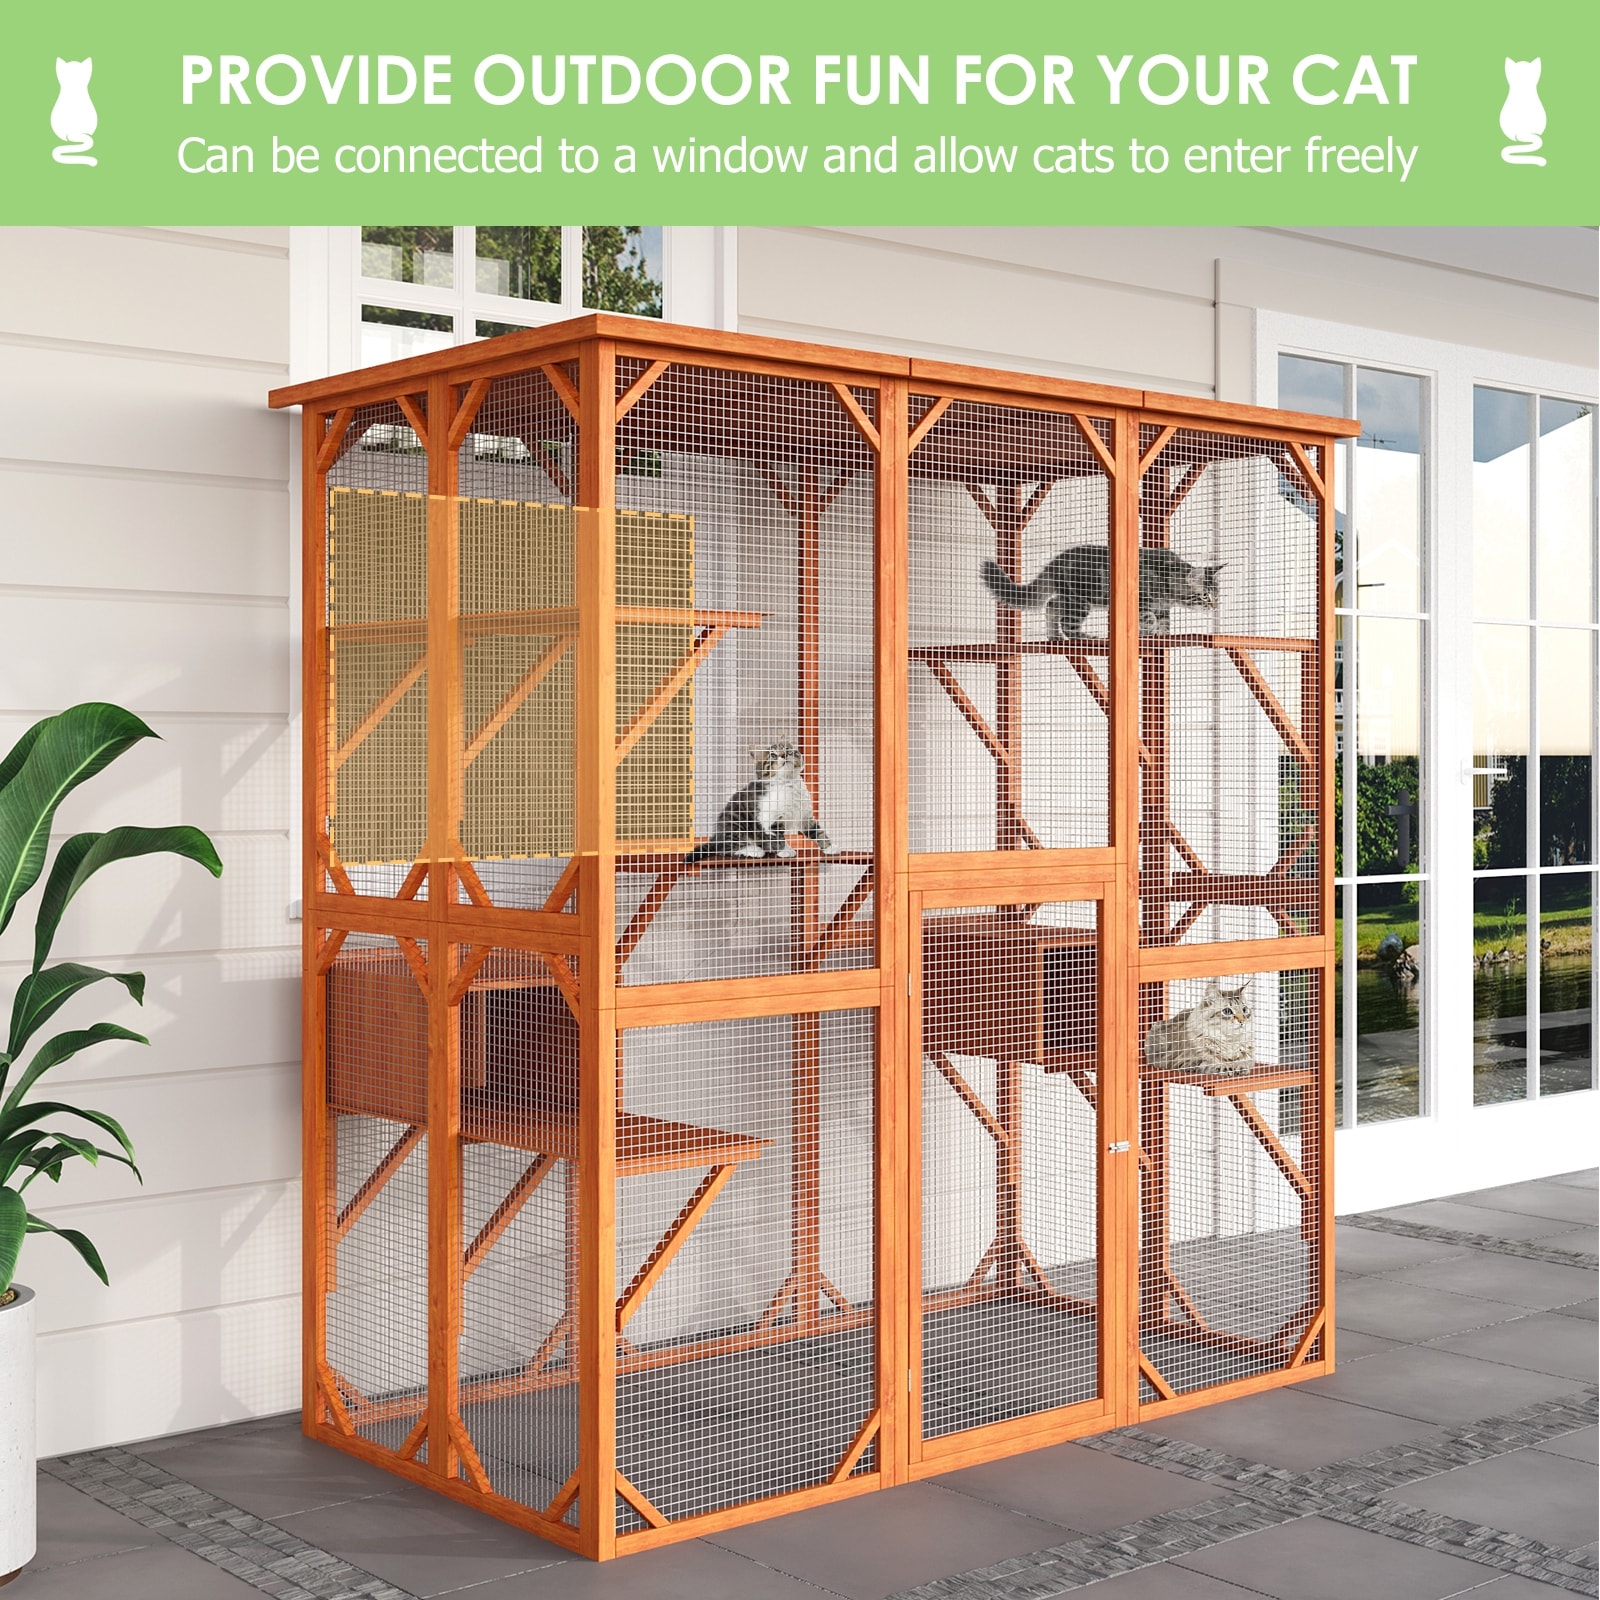 Catios & Outdoor Cat Enclosures, Up To 20% Off